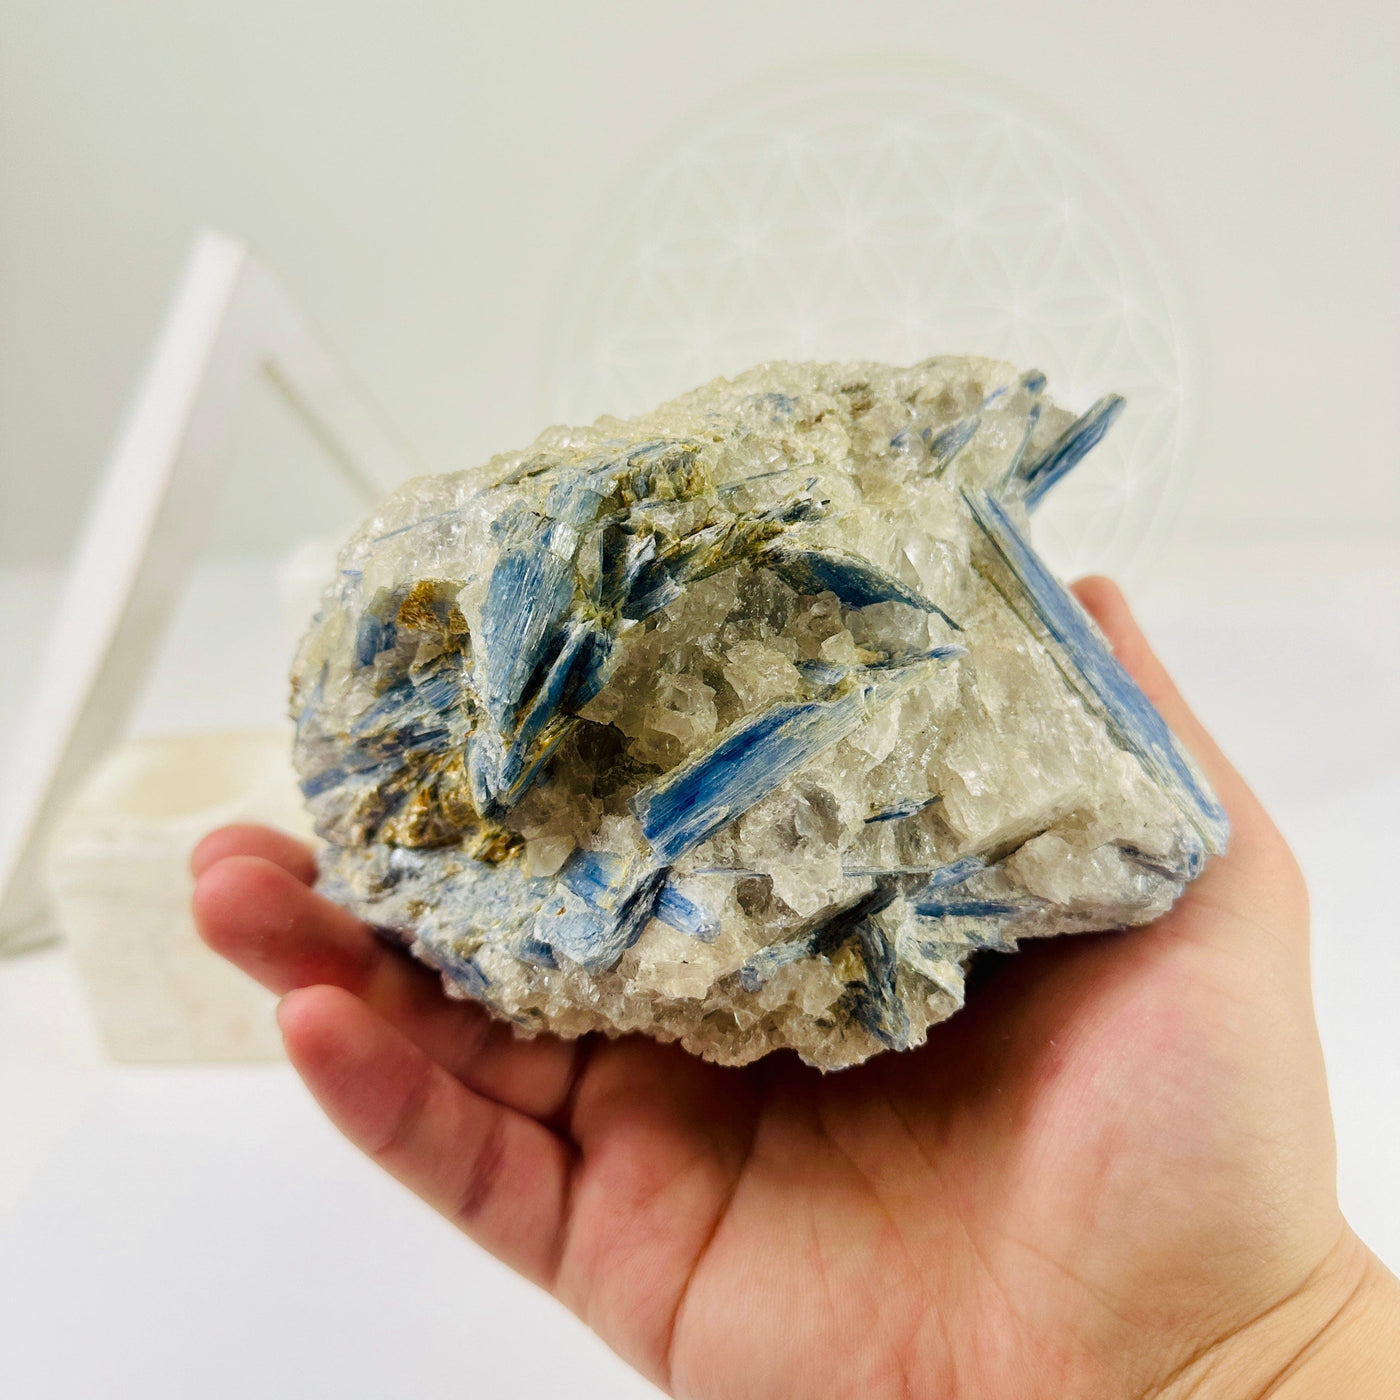 Blue Kyanite Rough Crystal Formation in hand for size reference